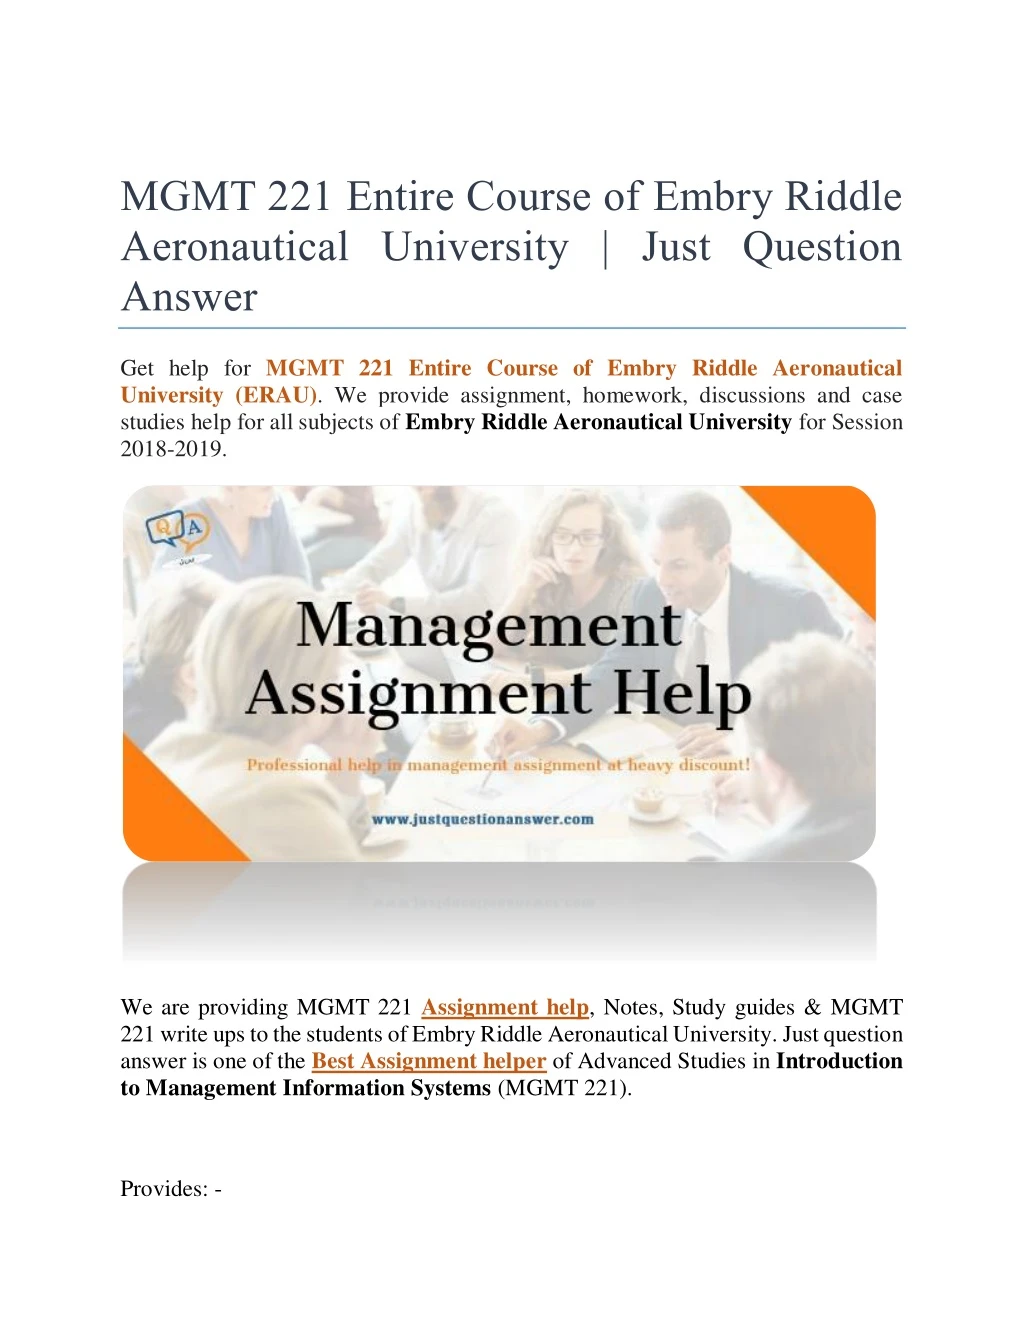 mgmt 221 entire course of embry riddle